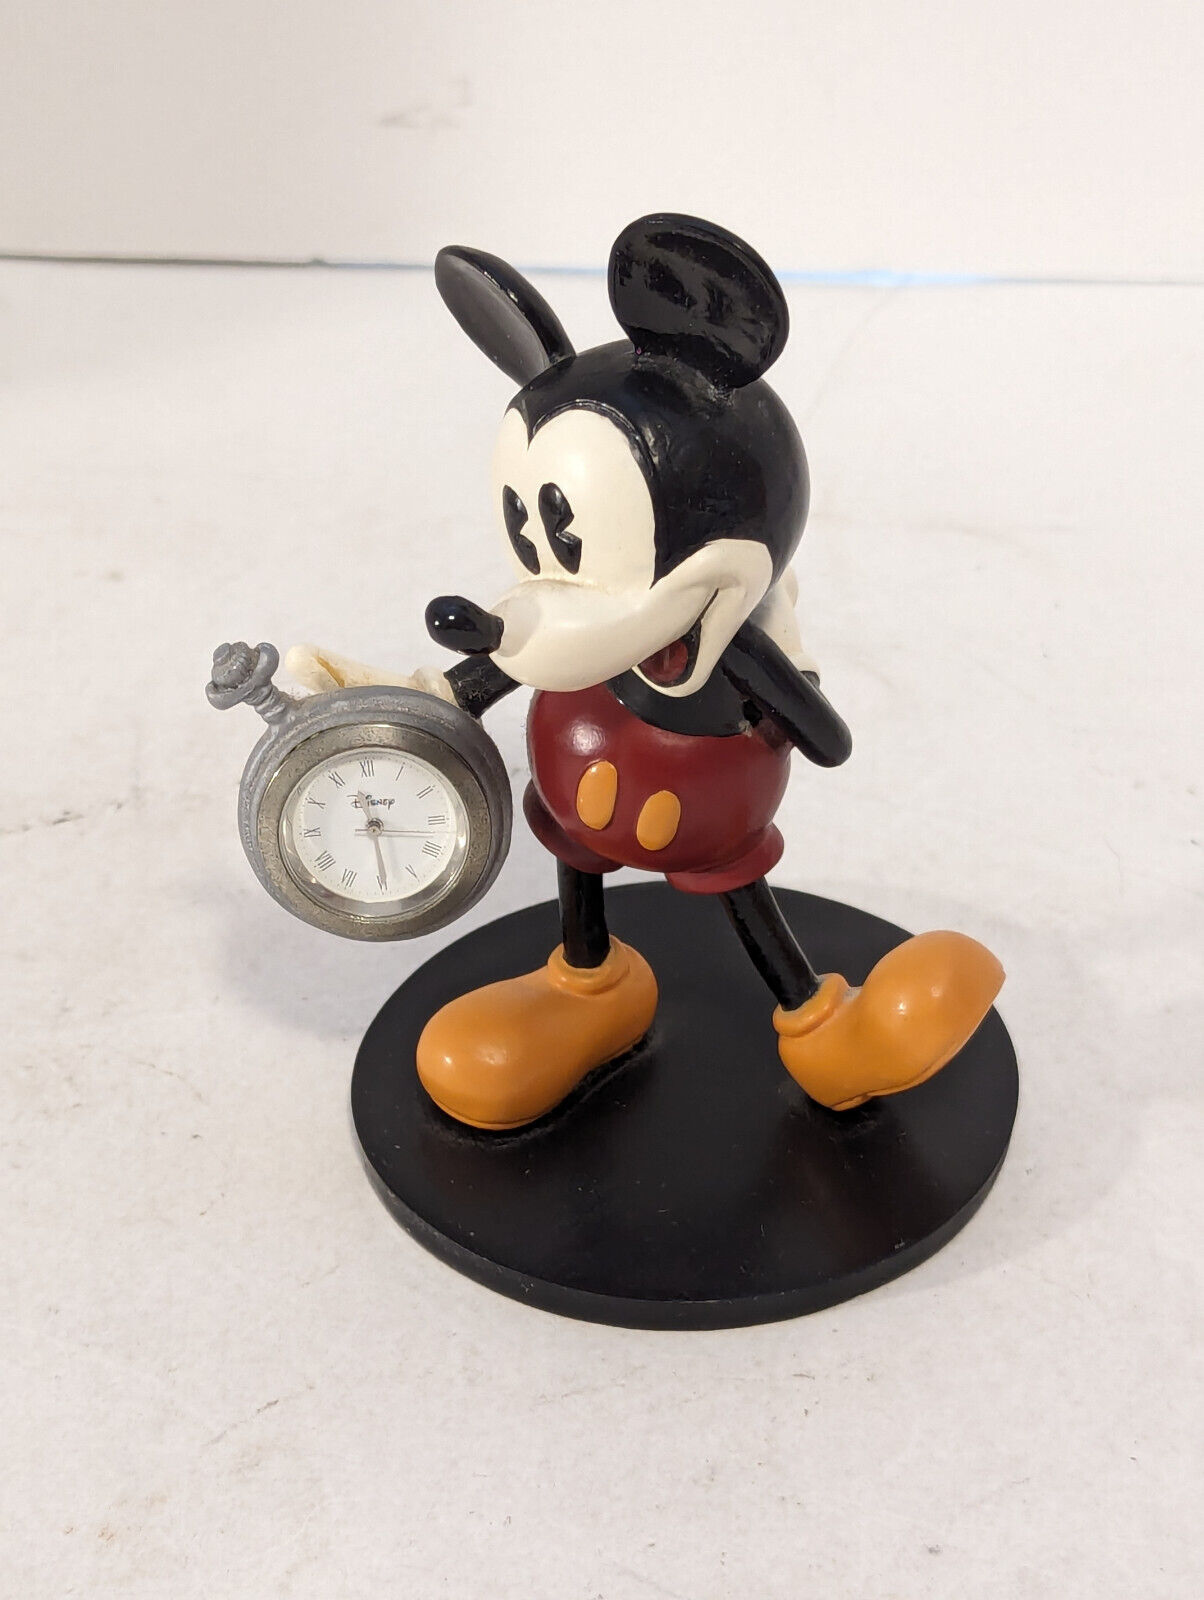 Disney Timely Classic Collectors Mickey Mouse Figure with Stop Watch